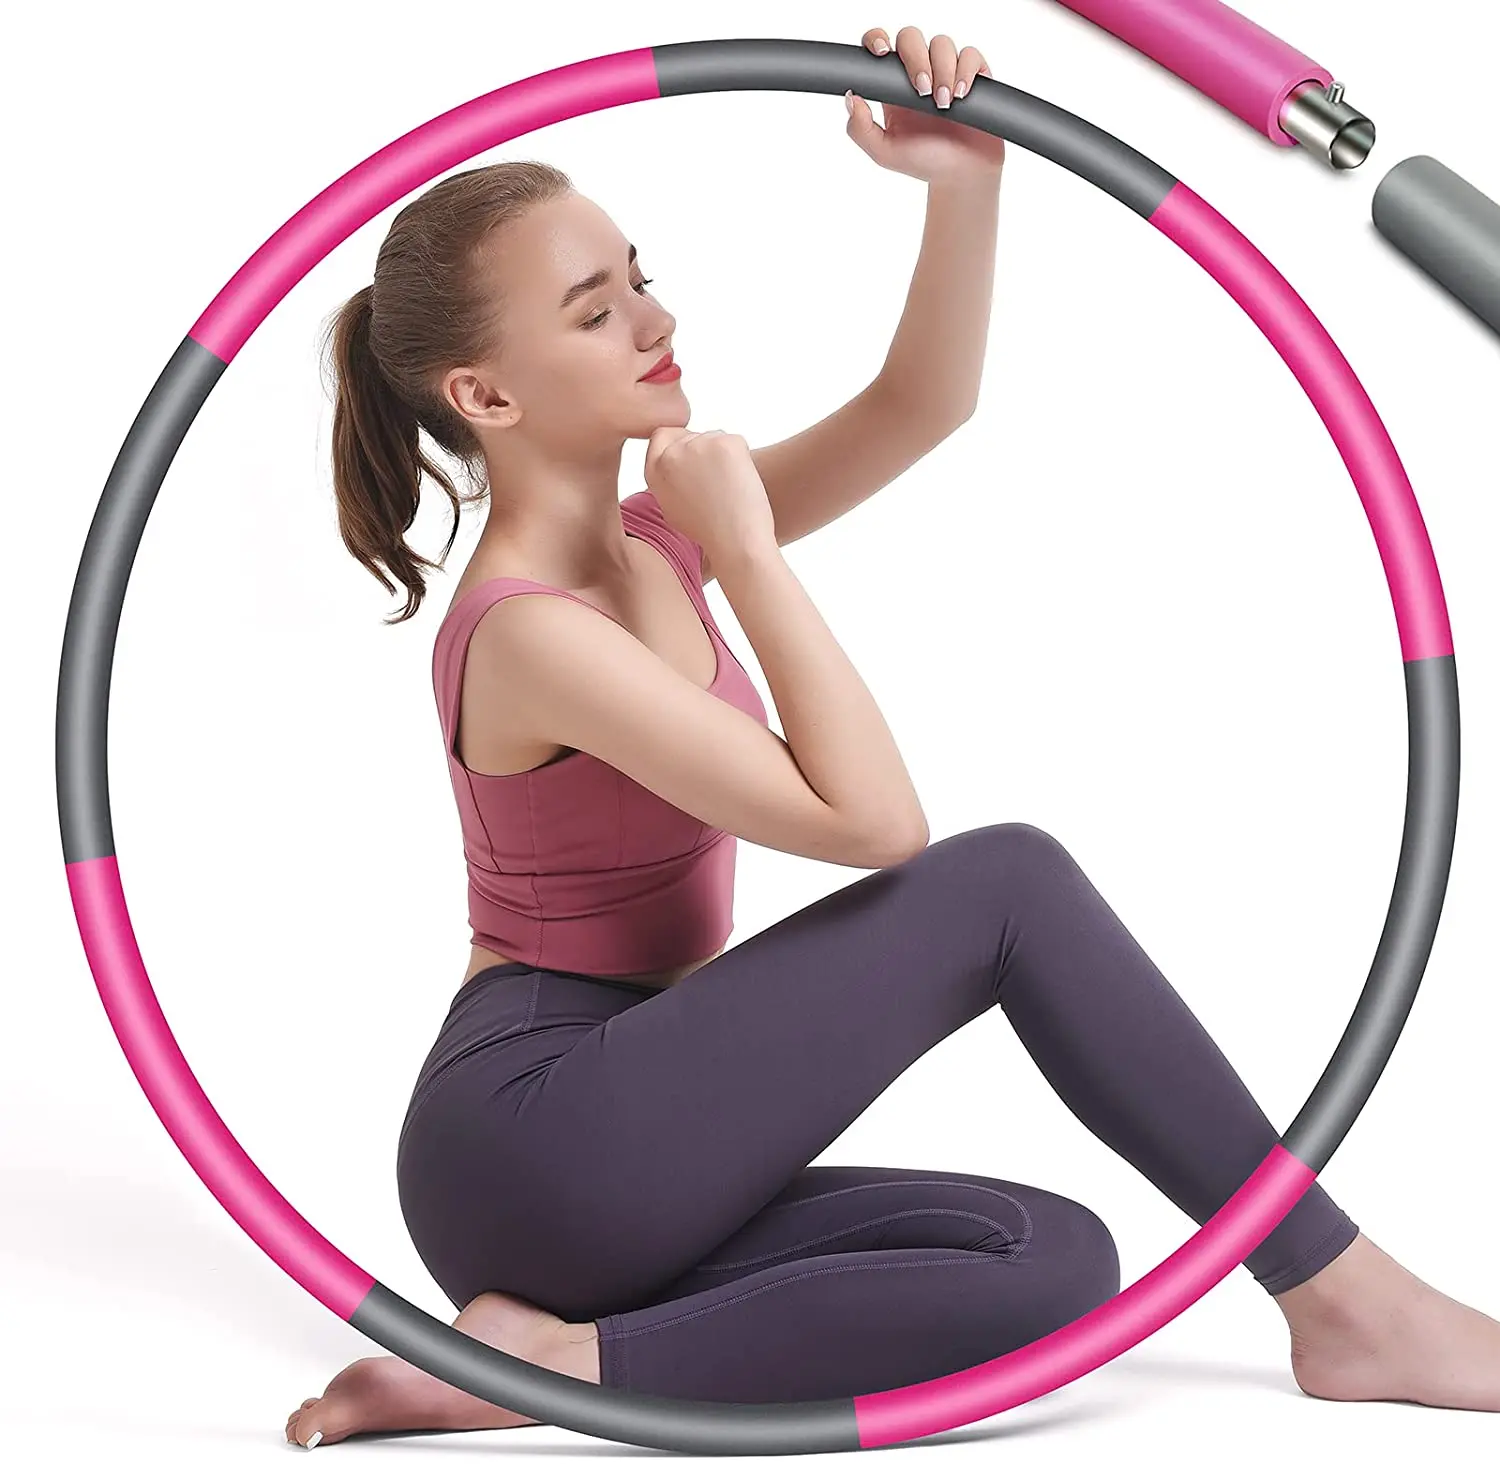 Details about   4x Large High Gloss Hula Hoops Kids Adults Fitness Exercise Hula Ring Game 60cm 